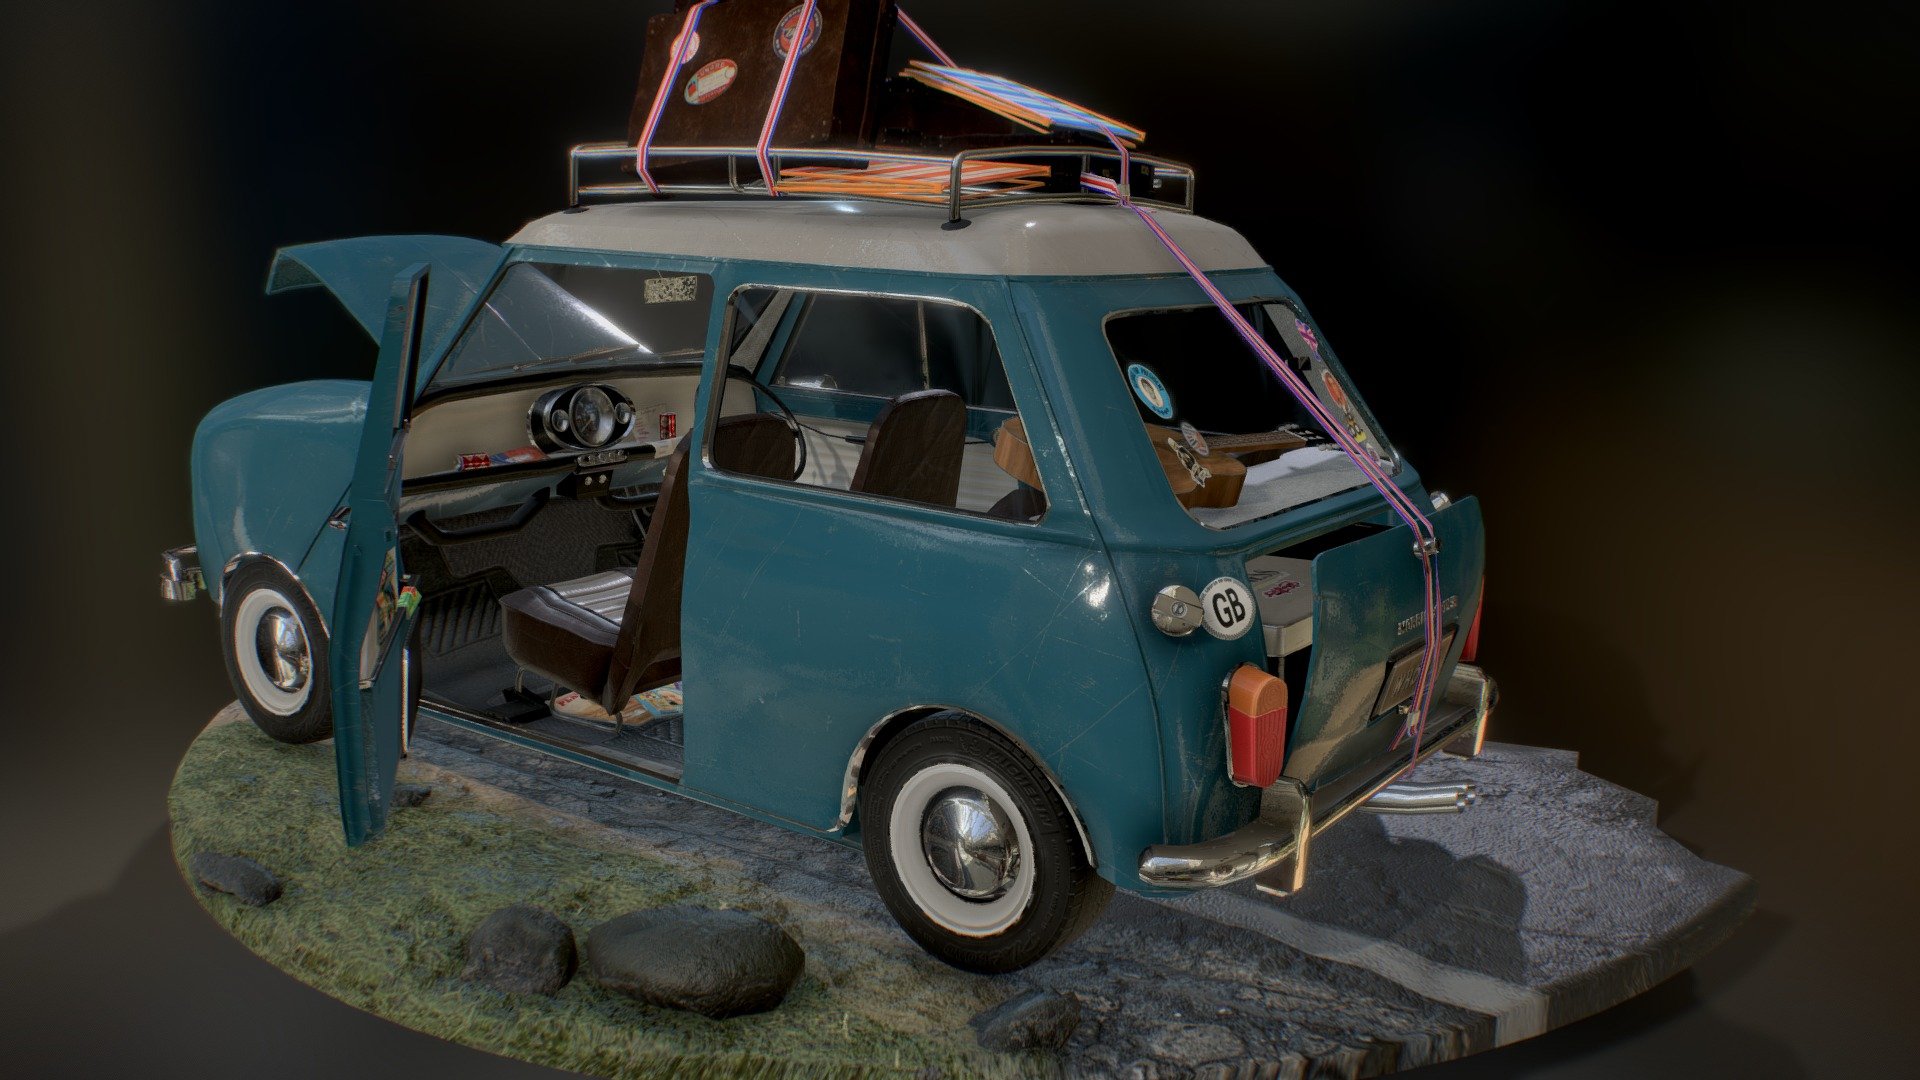 I know I still have the Aston Martin to fix but&hellip; well :D

https://www.artstation.com/artwork/JDLWZ

And for those who want to see the toolbag viewer you can go on my portfolio too : http://www.niouhop.com/#cooper - Morris Cooper S / Austin Mini / MK1 - 3D model by niouhop 3d model